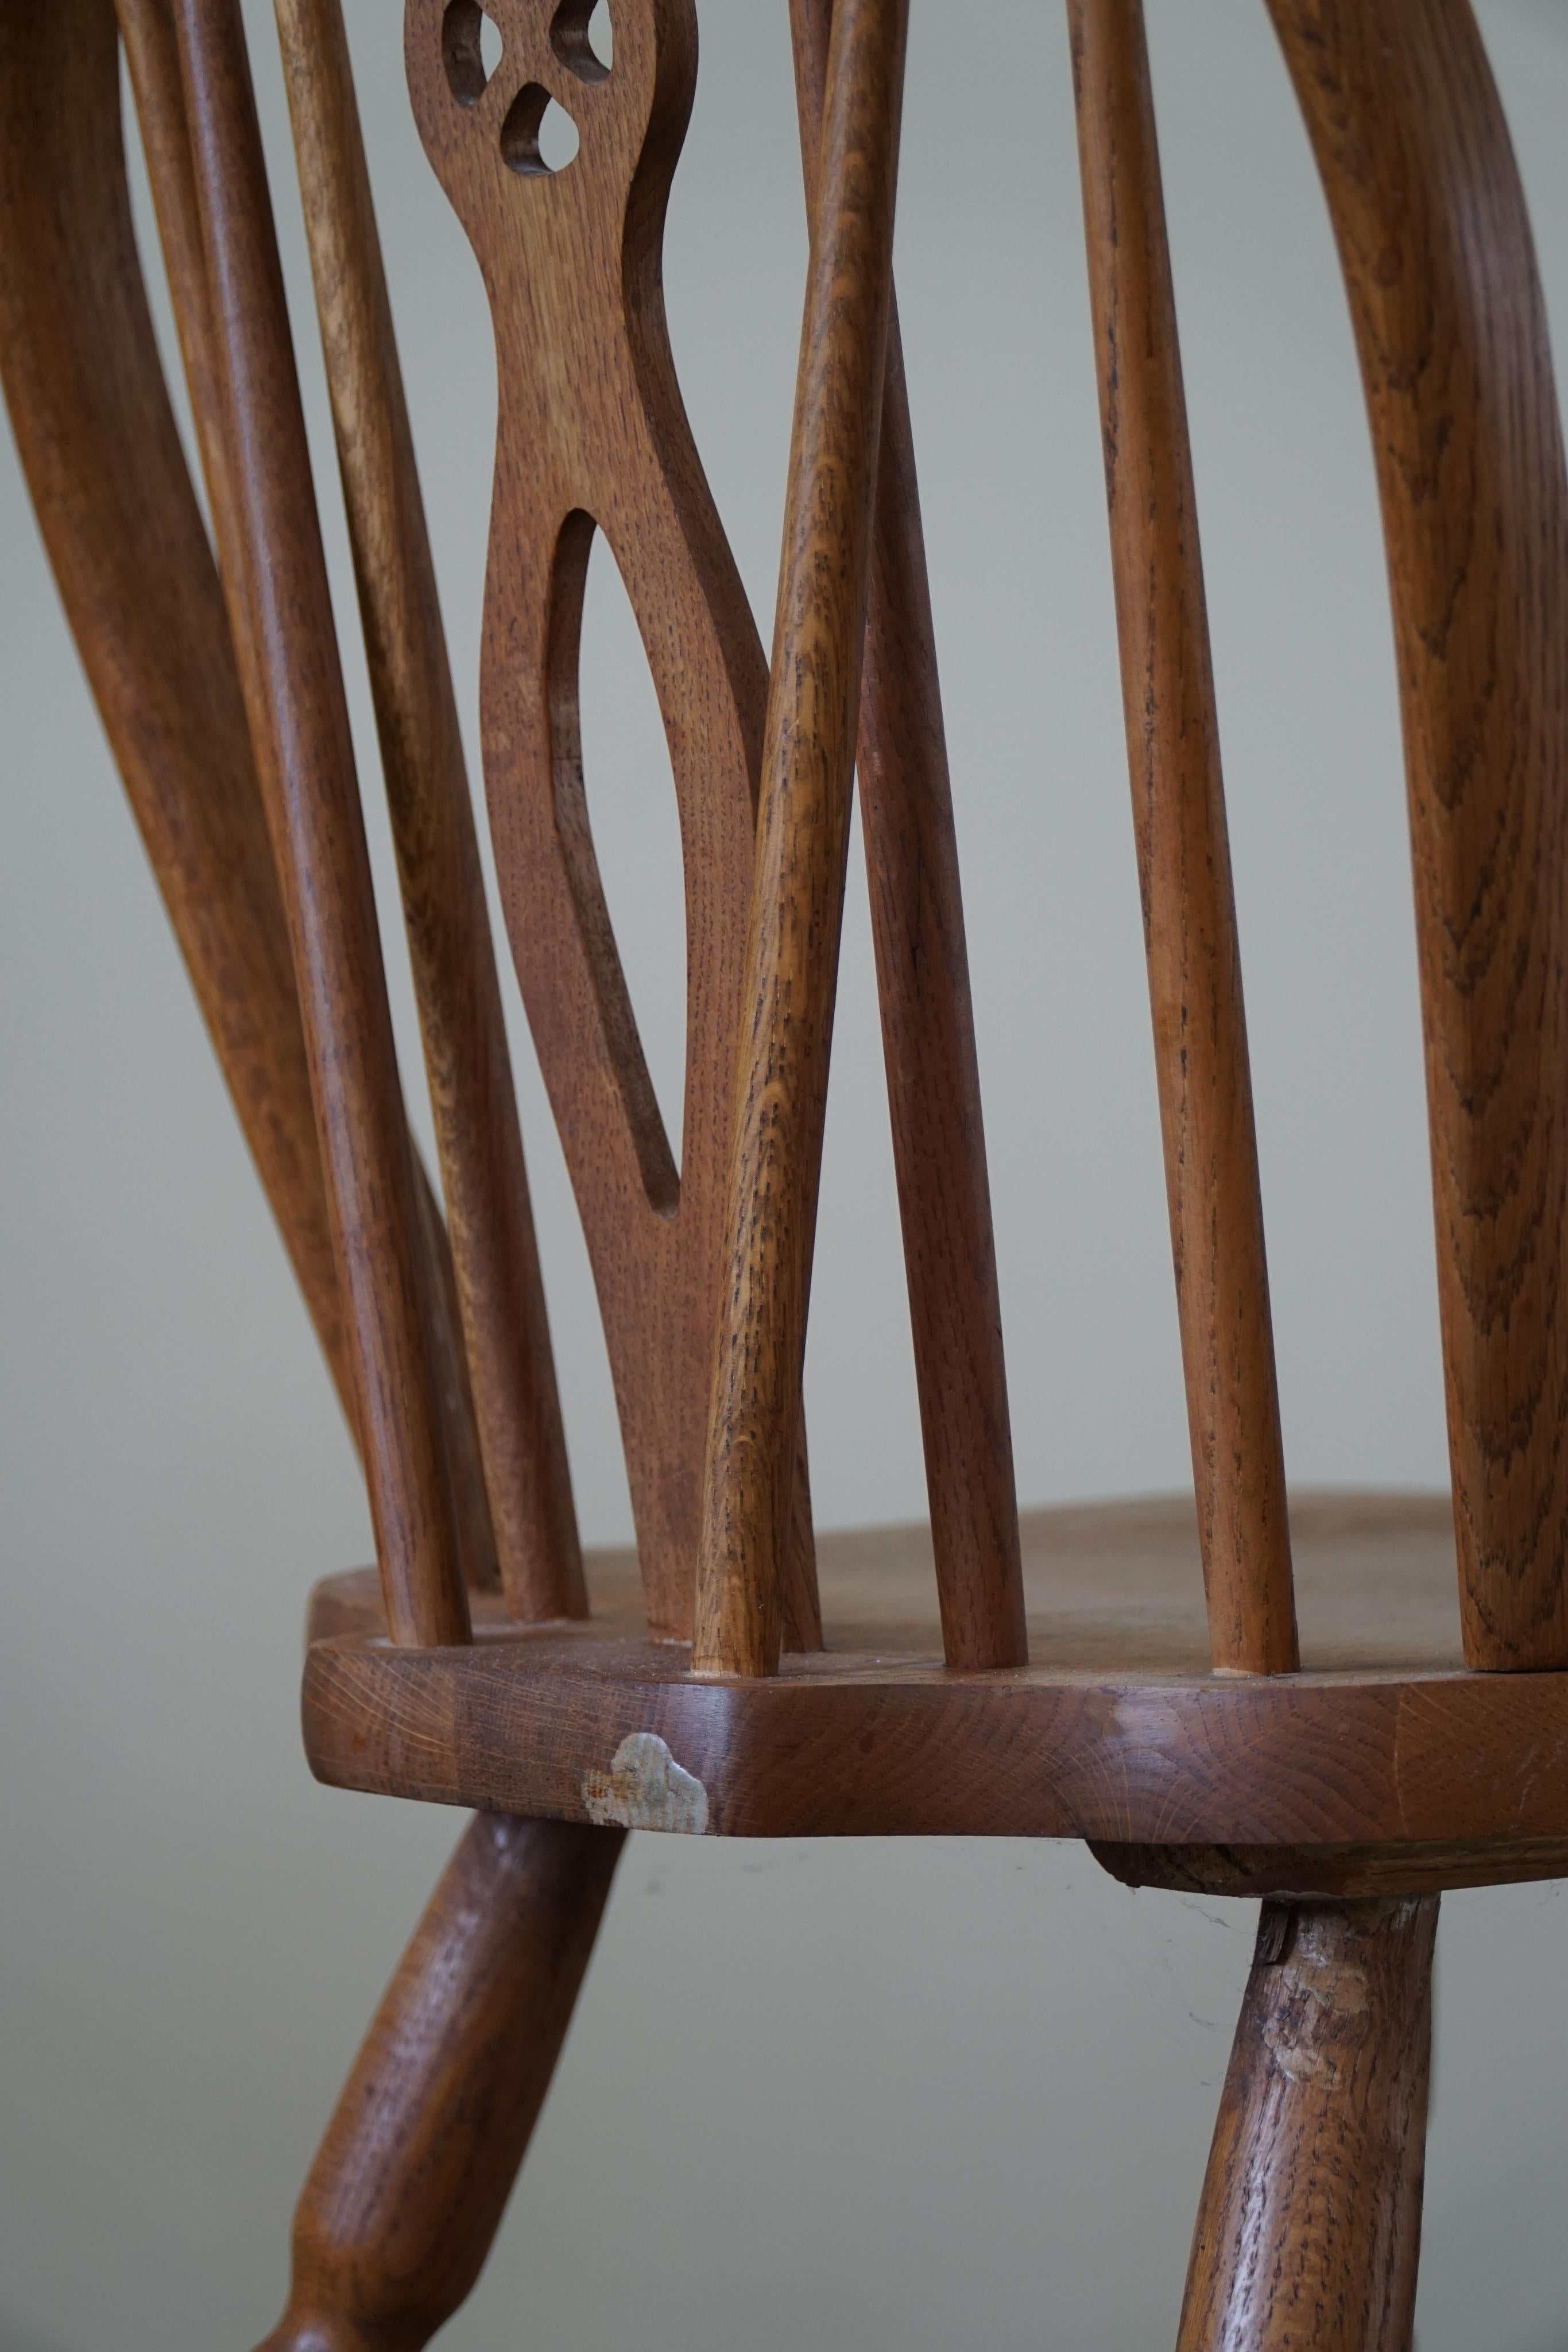 Set of 6 Windsor Dining Room Chairs in Oak, English Edwardian, 19th Century For Sale 4